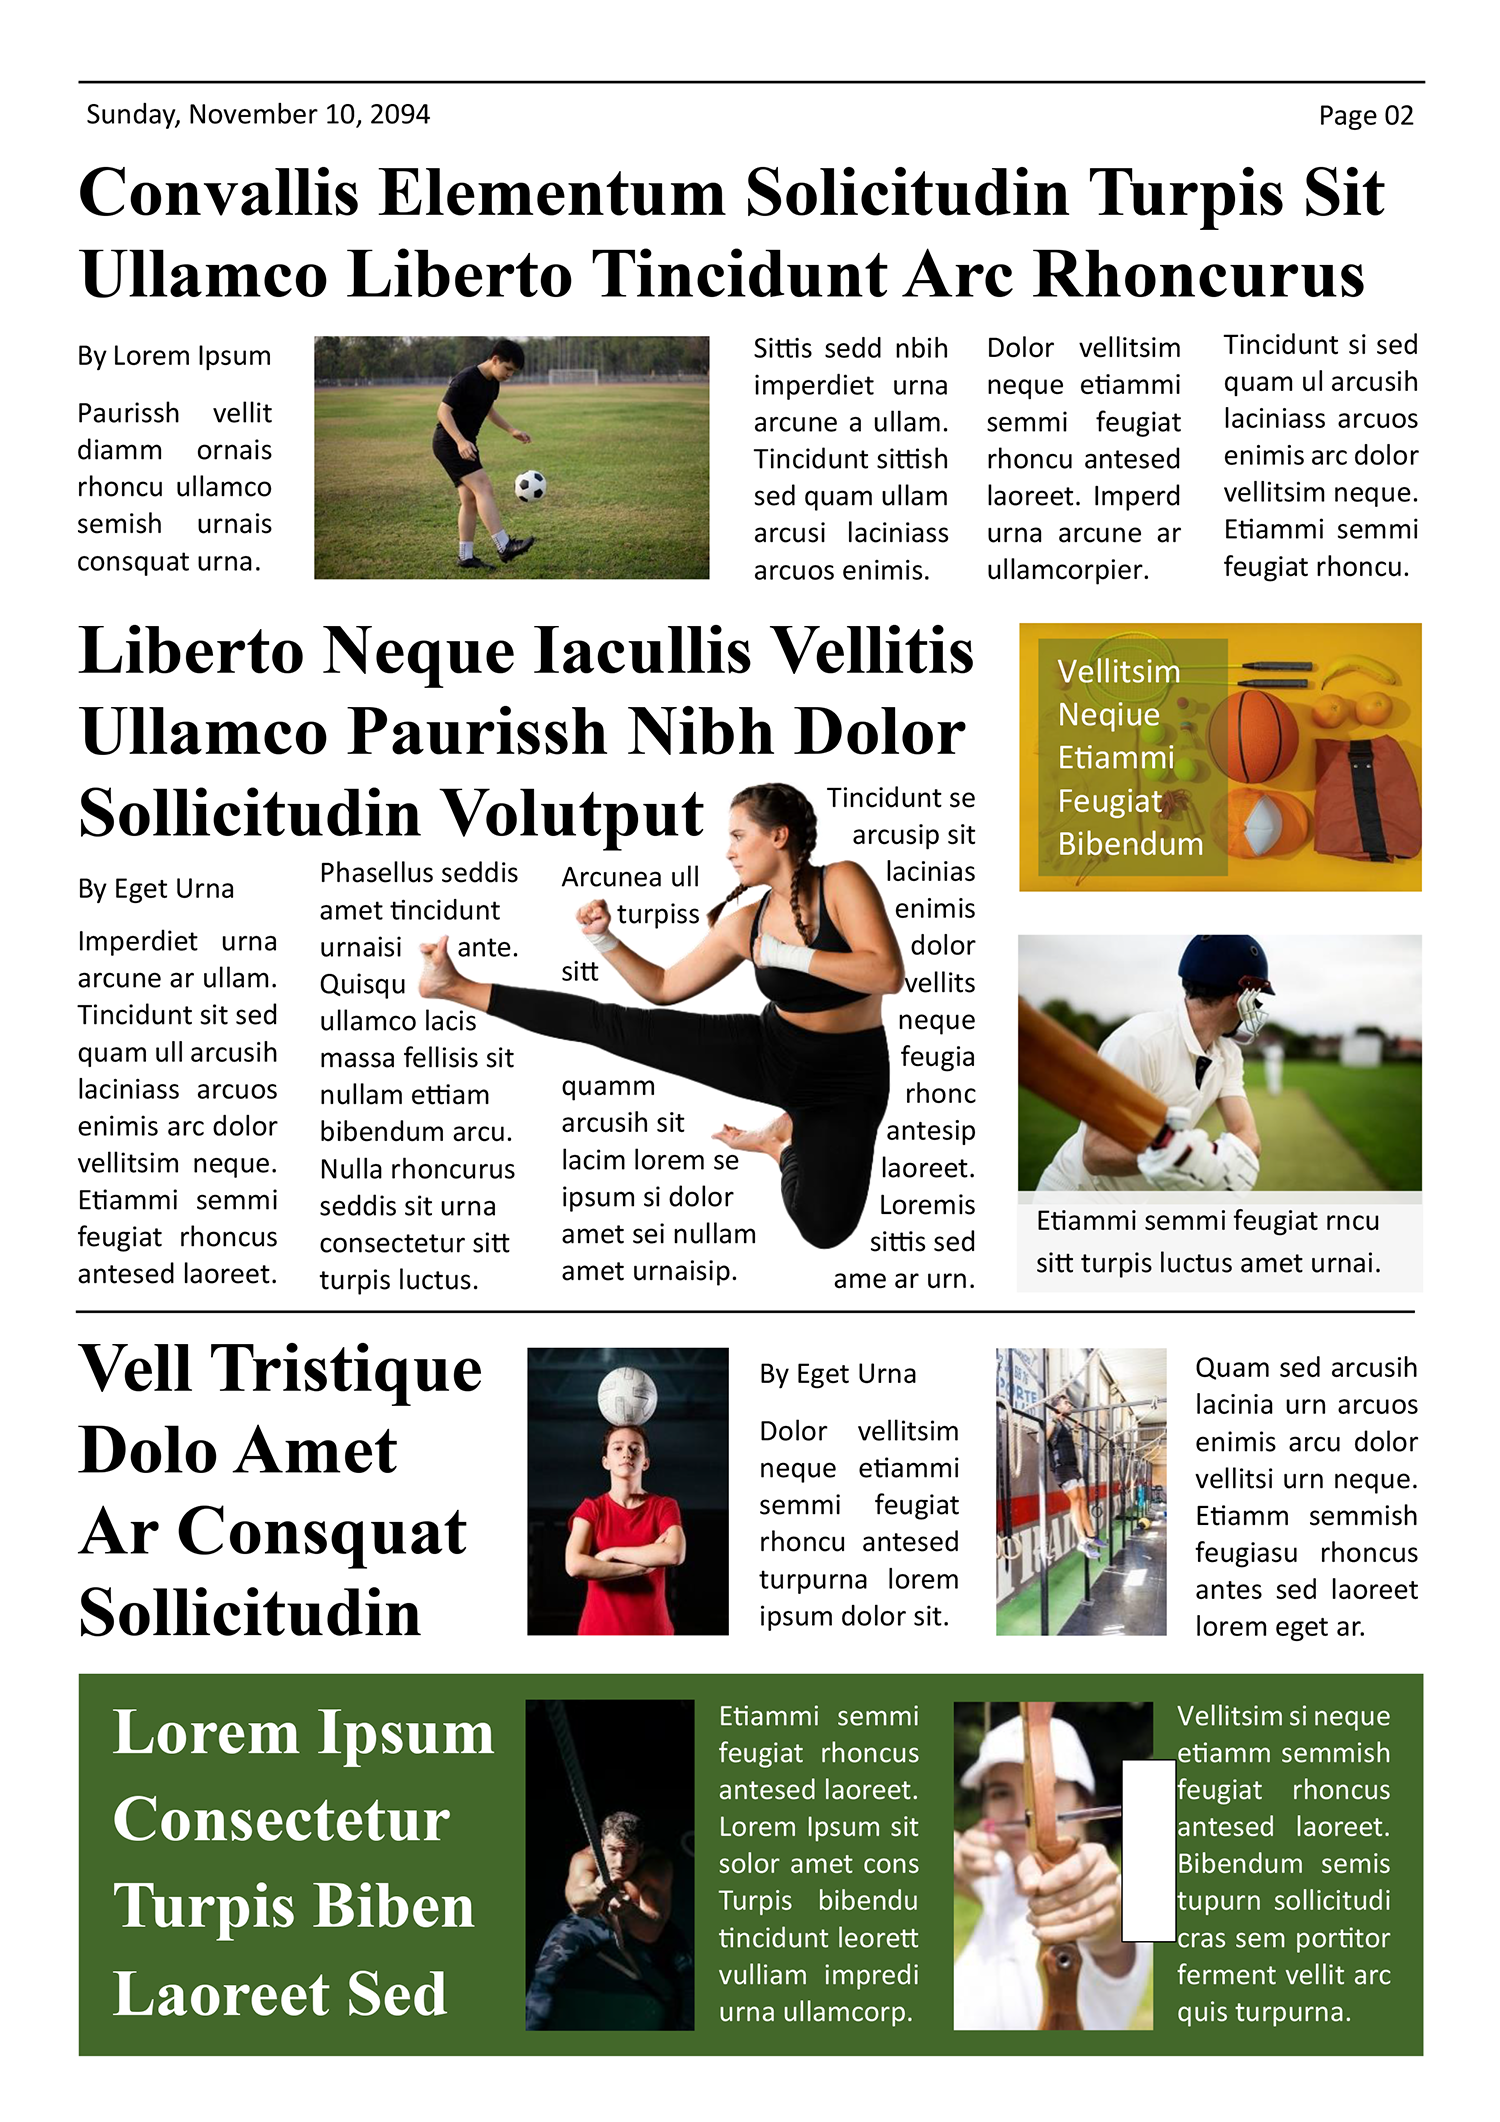 Sport Newspaper Front Page Template - Page 02